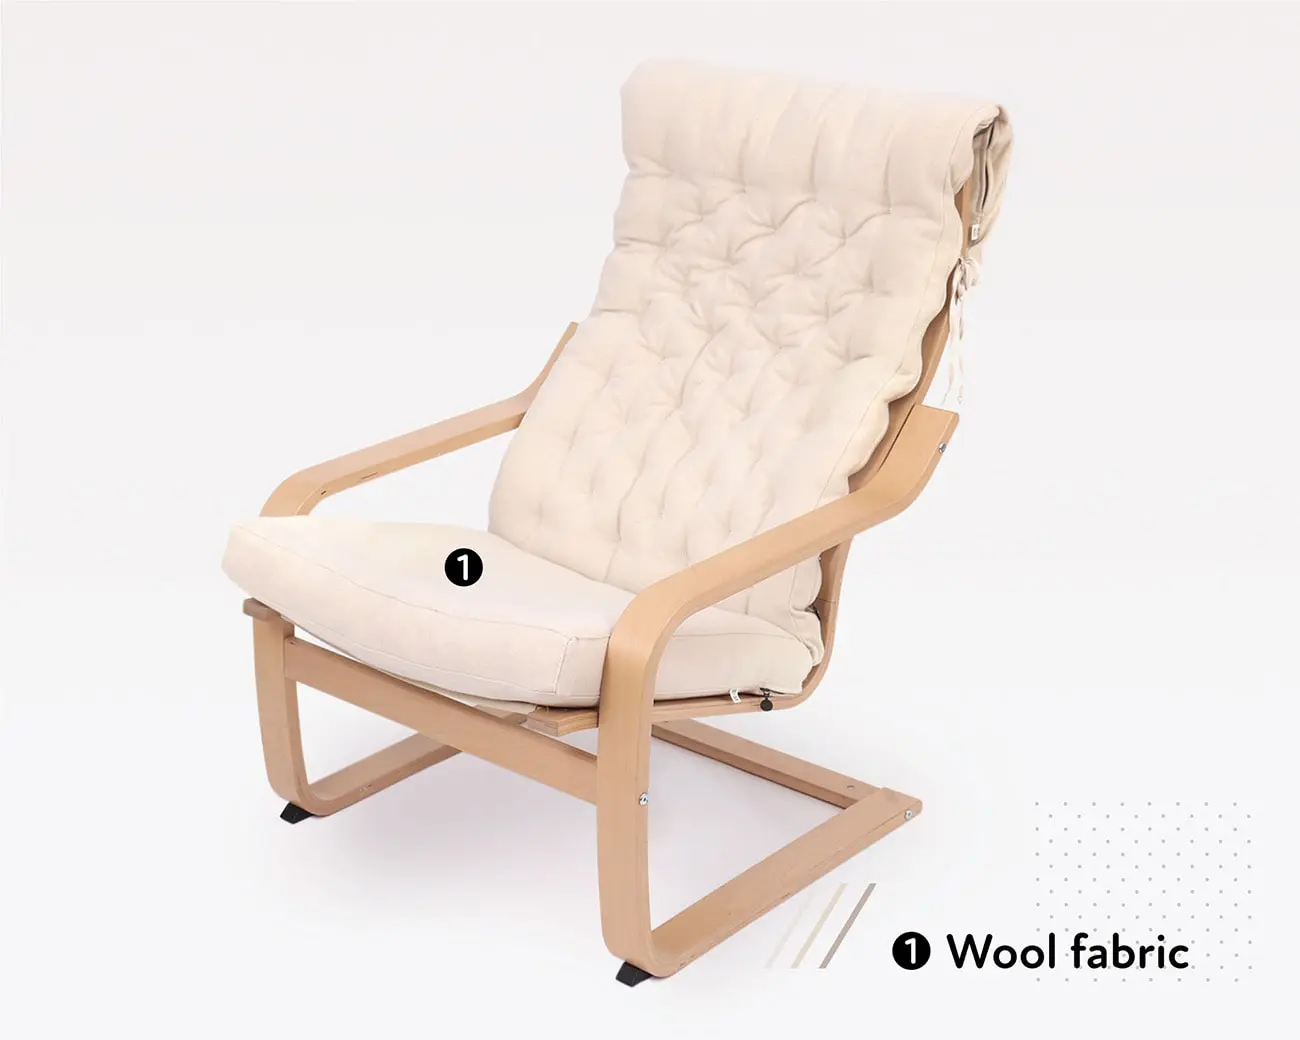 https://homeofwool.com/wp-content/uploads/2021/03/Home-of-Wool-poang-chair-with-wool-fabric-cover.jpg